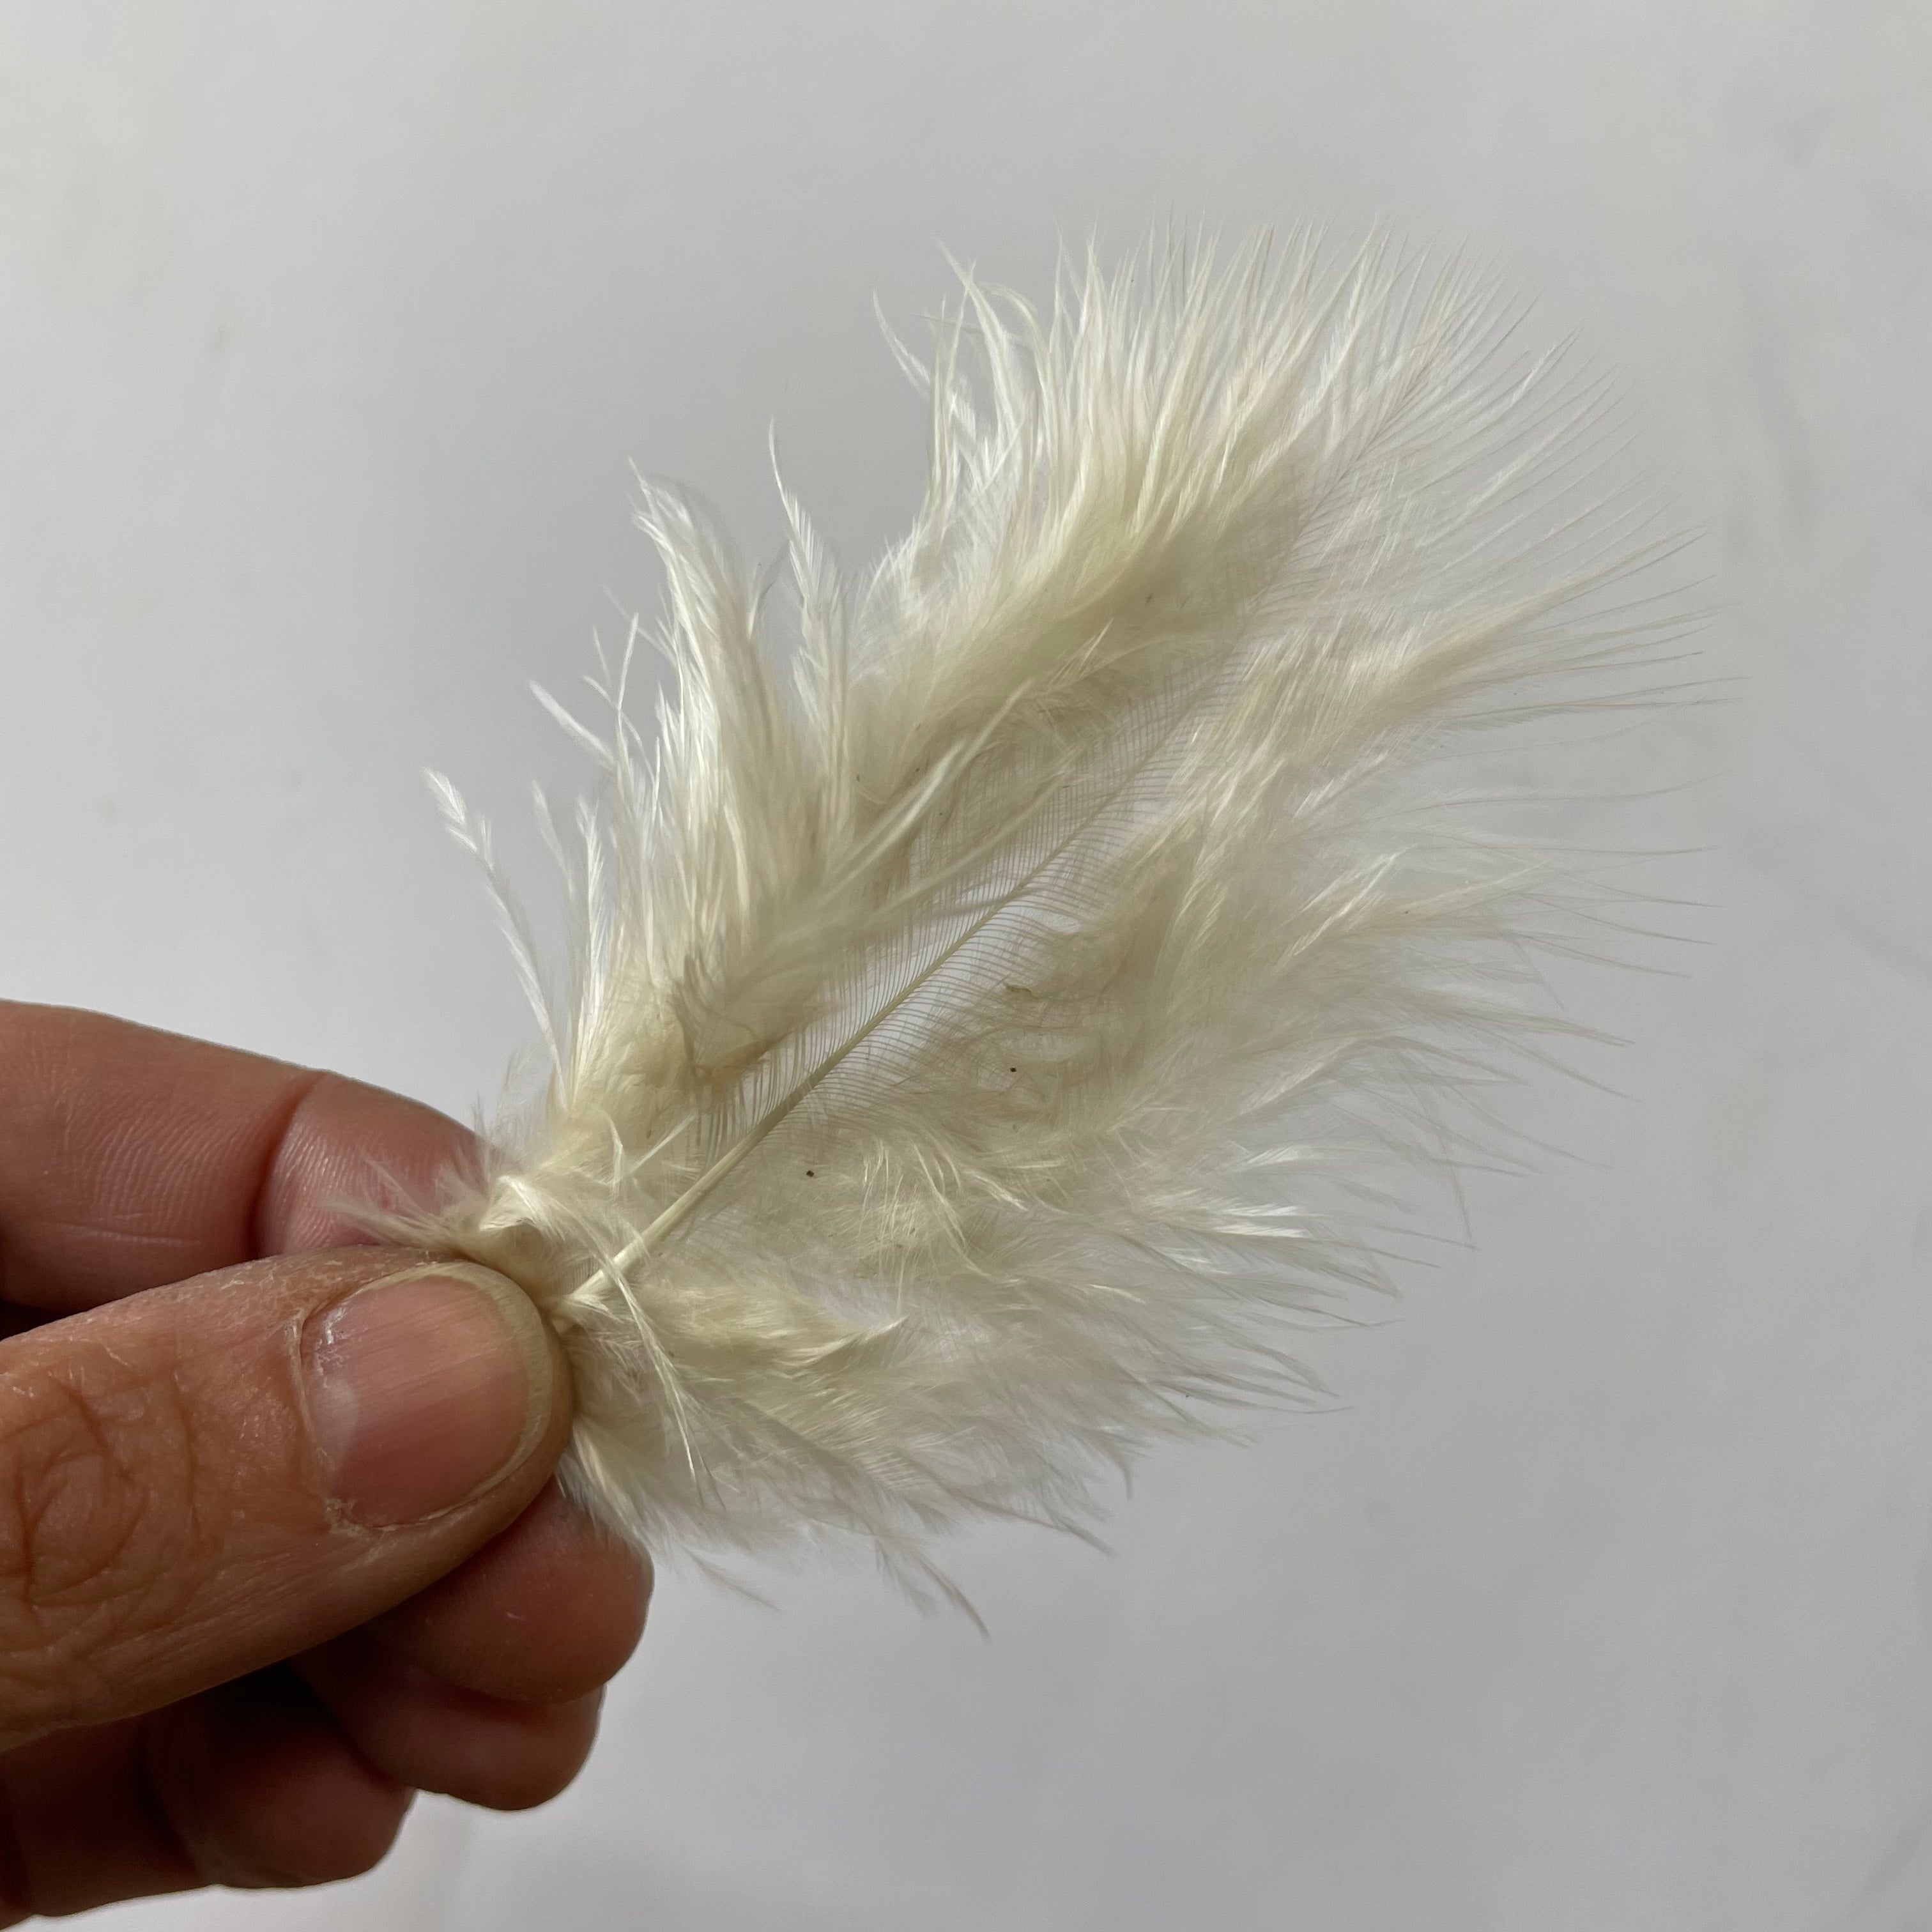 Fluffy Marabou Feather Plumage 10 grams - Champagne